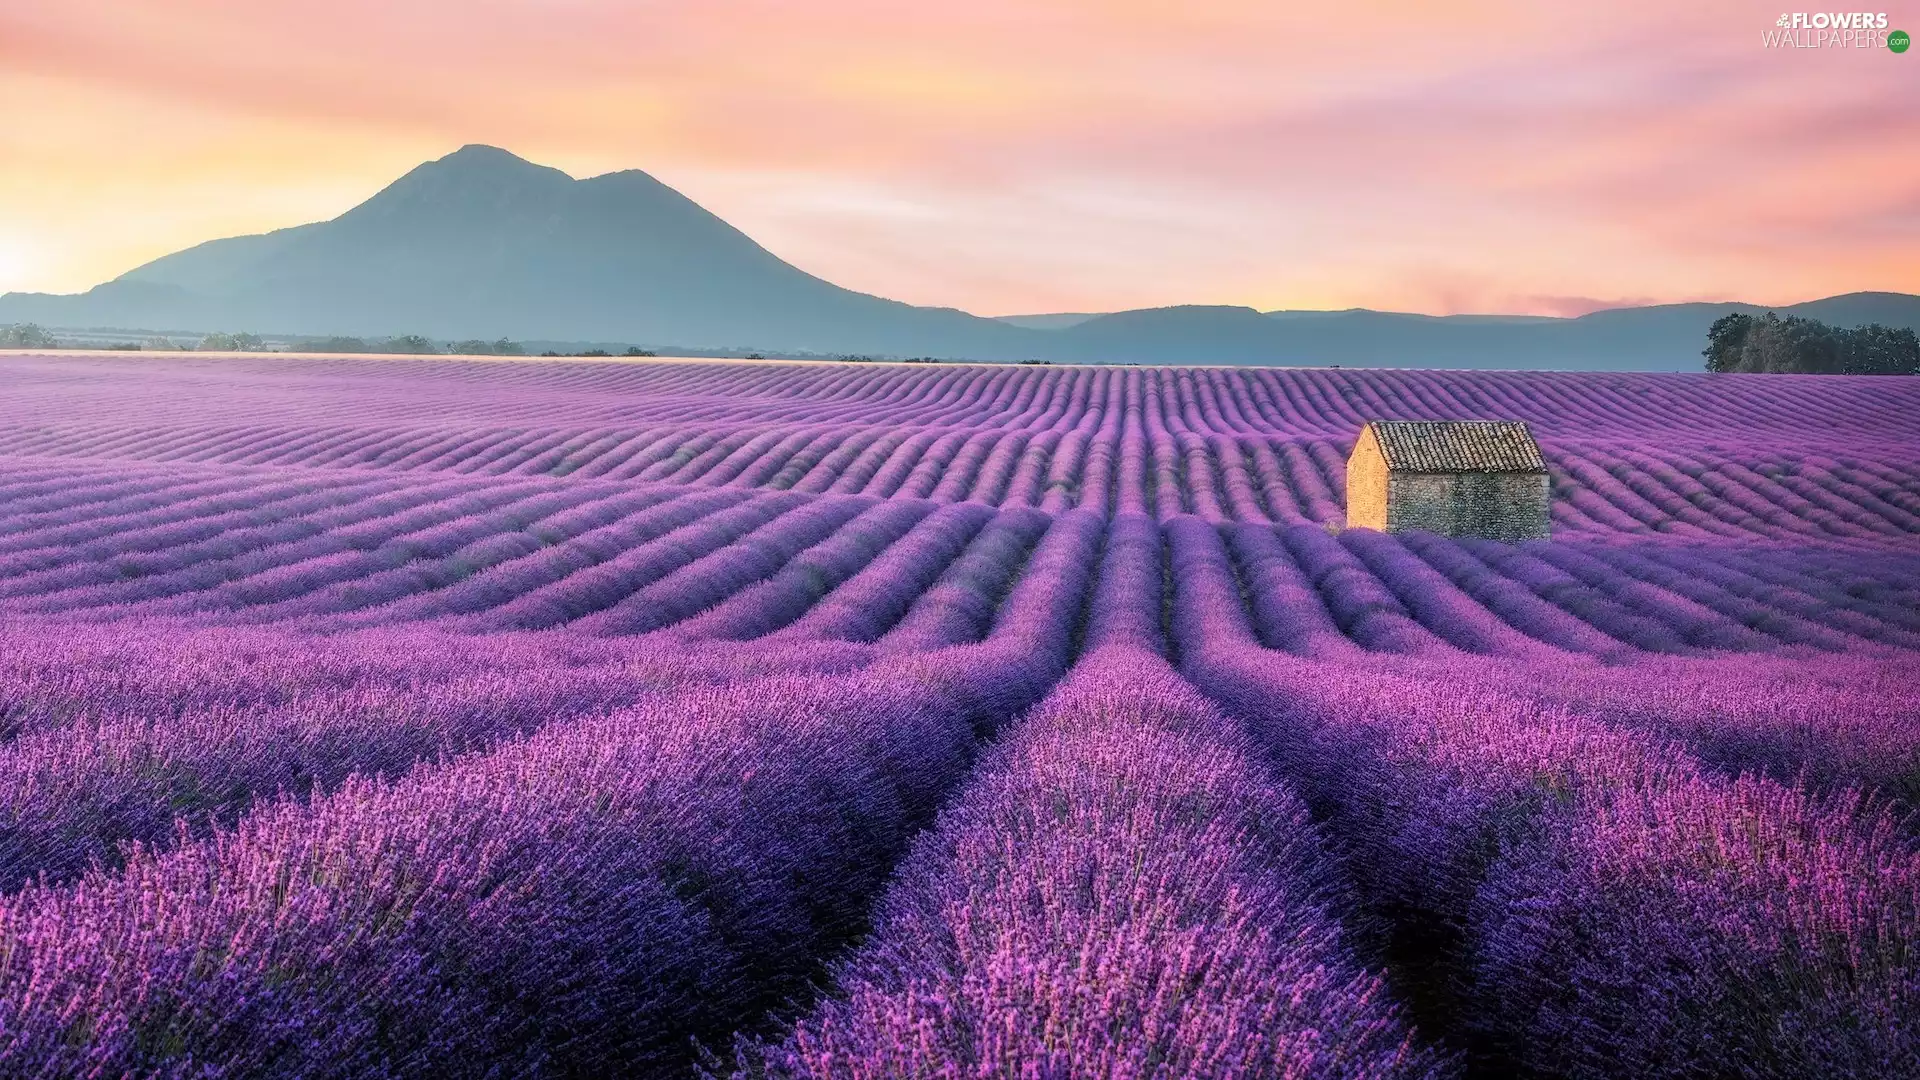 Mountains, lavender, house, Field